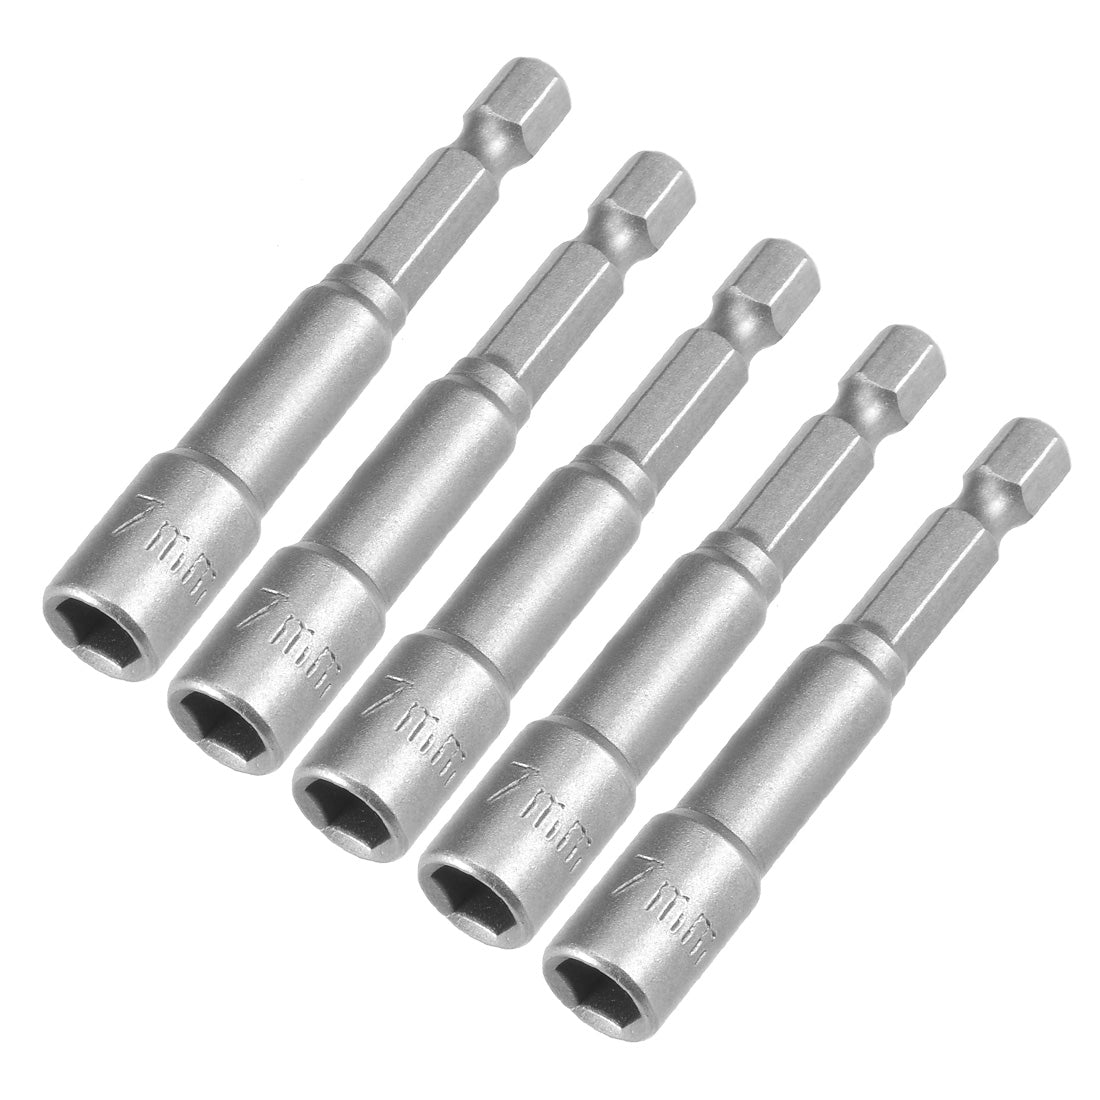 uxcell Uxcell 5 Pcs 1/4" Quick-Change Hex Shank 7mm Magnetic Nut Sockets Driver, 65mm Length